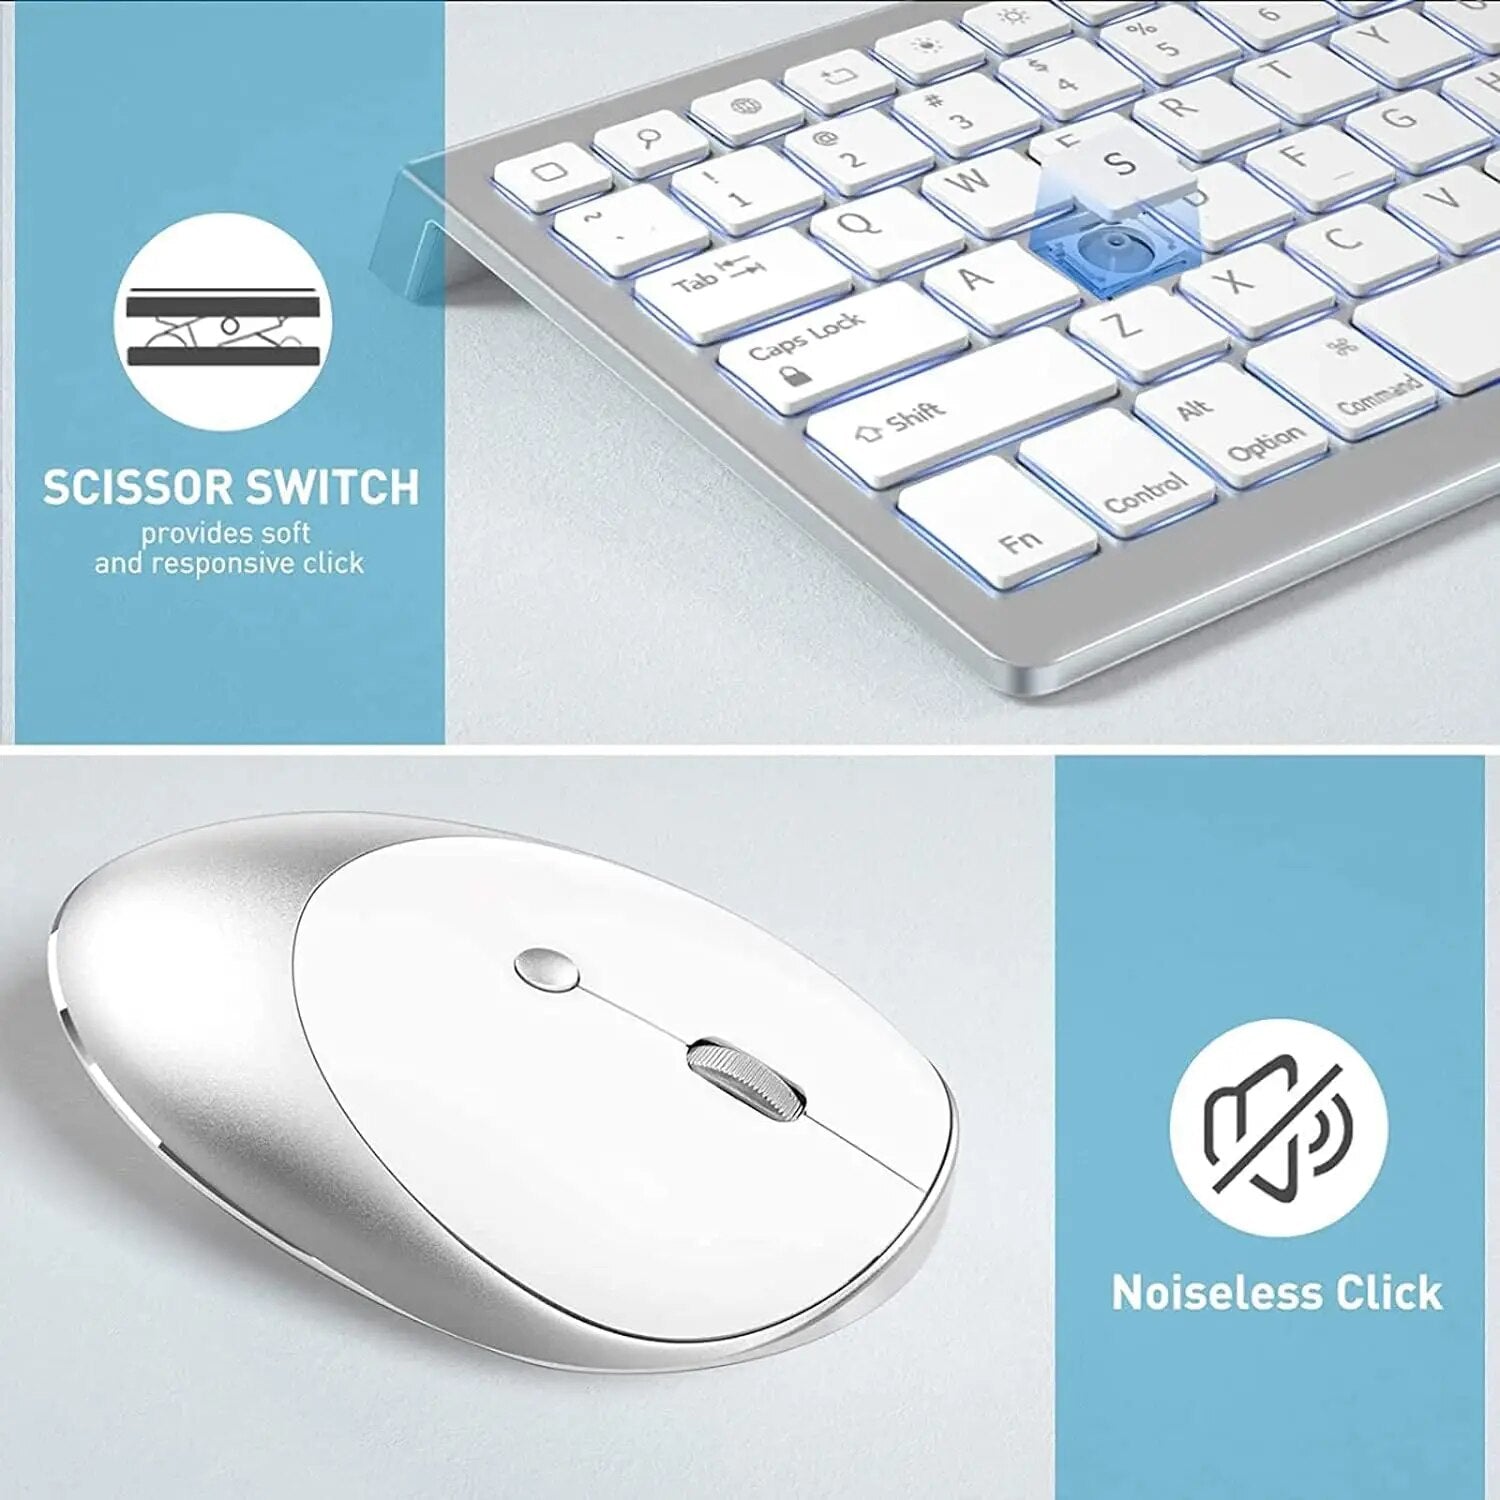 K01 Backlit Bluetooth Keyboard and Mouse